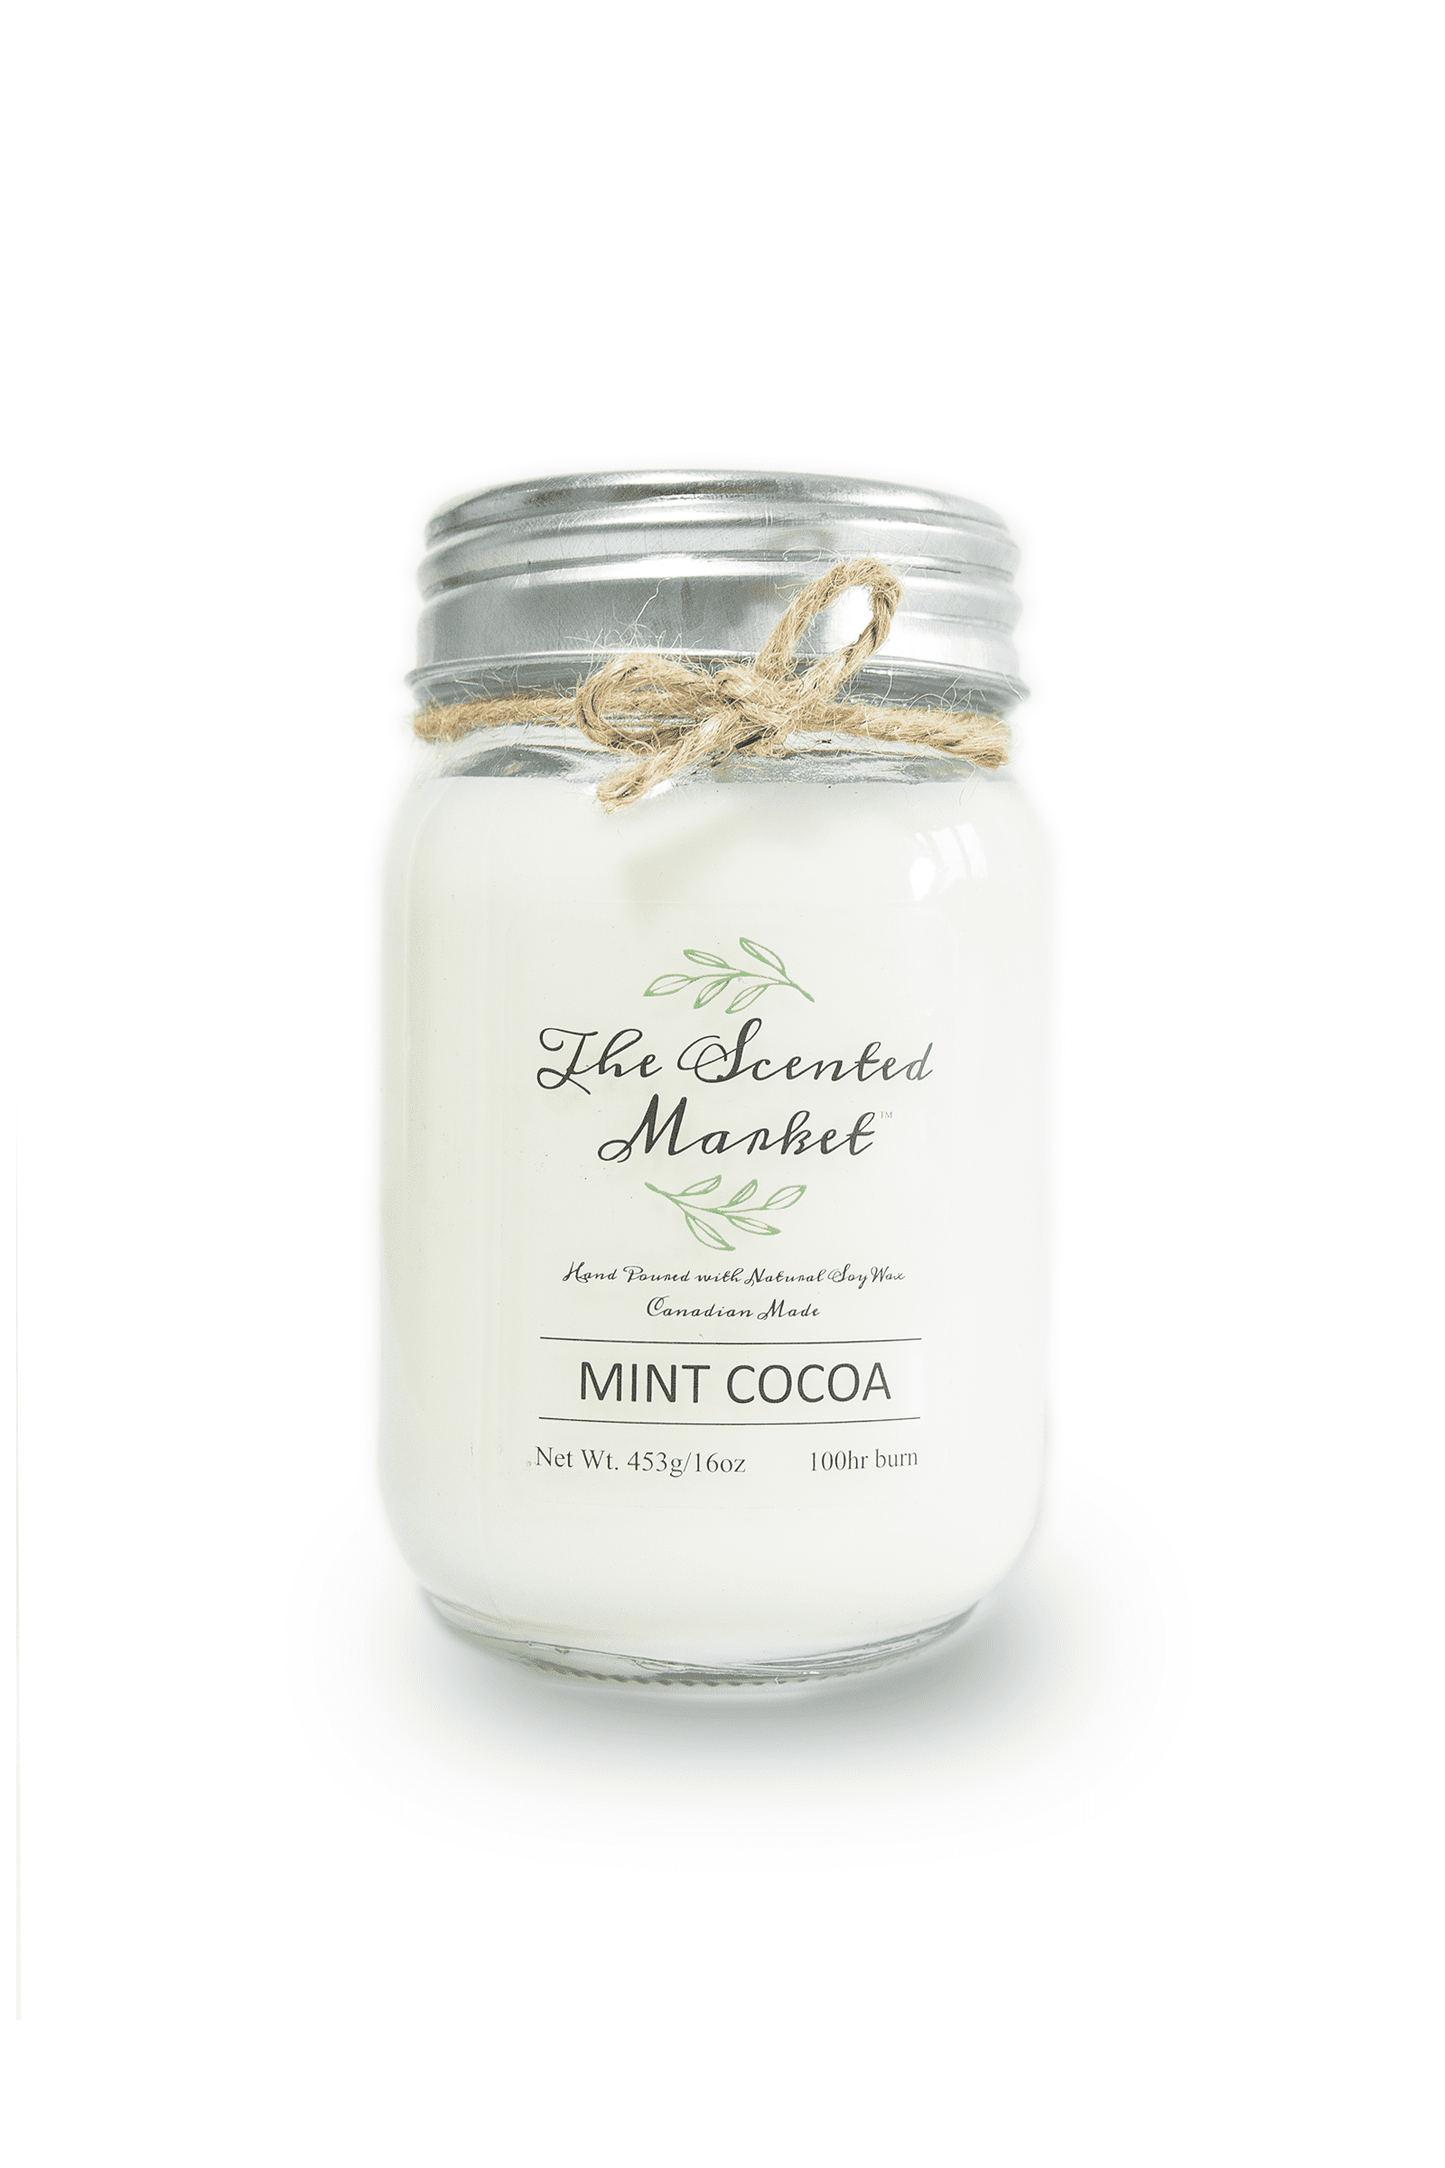 MINT COCOA Soy Wax Candle 16 oz